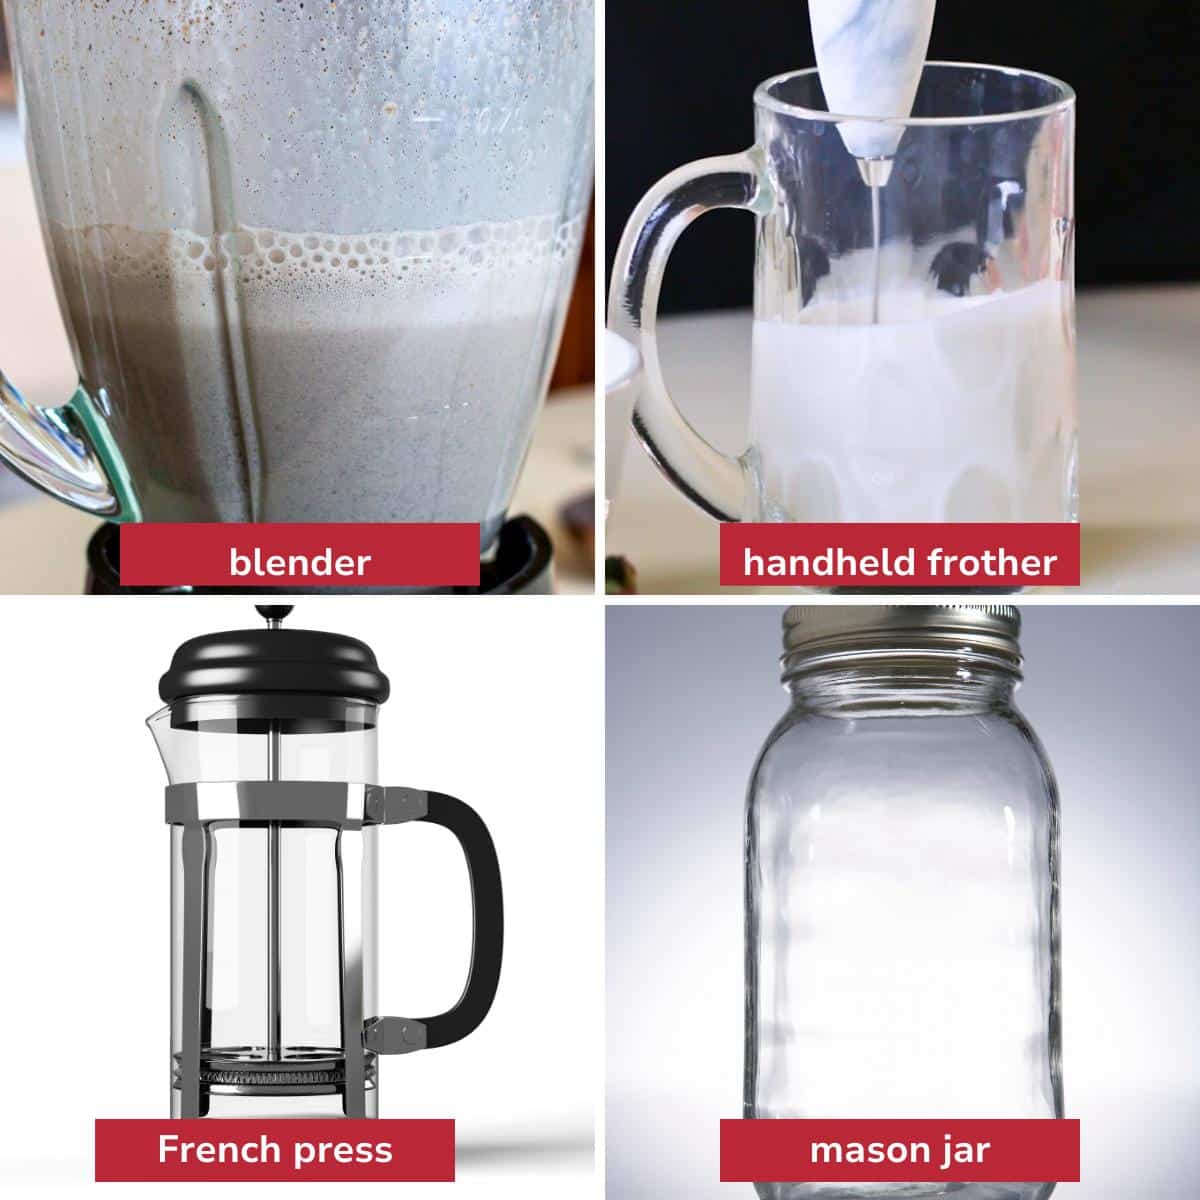 blender, handheld frother, French press and mason jar with a lid. 